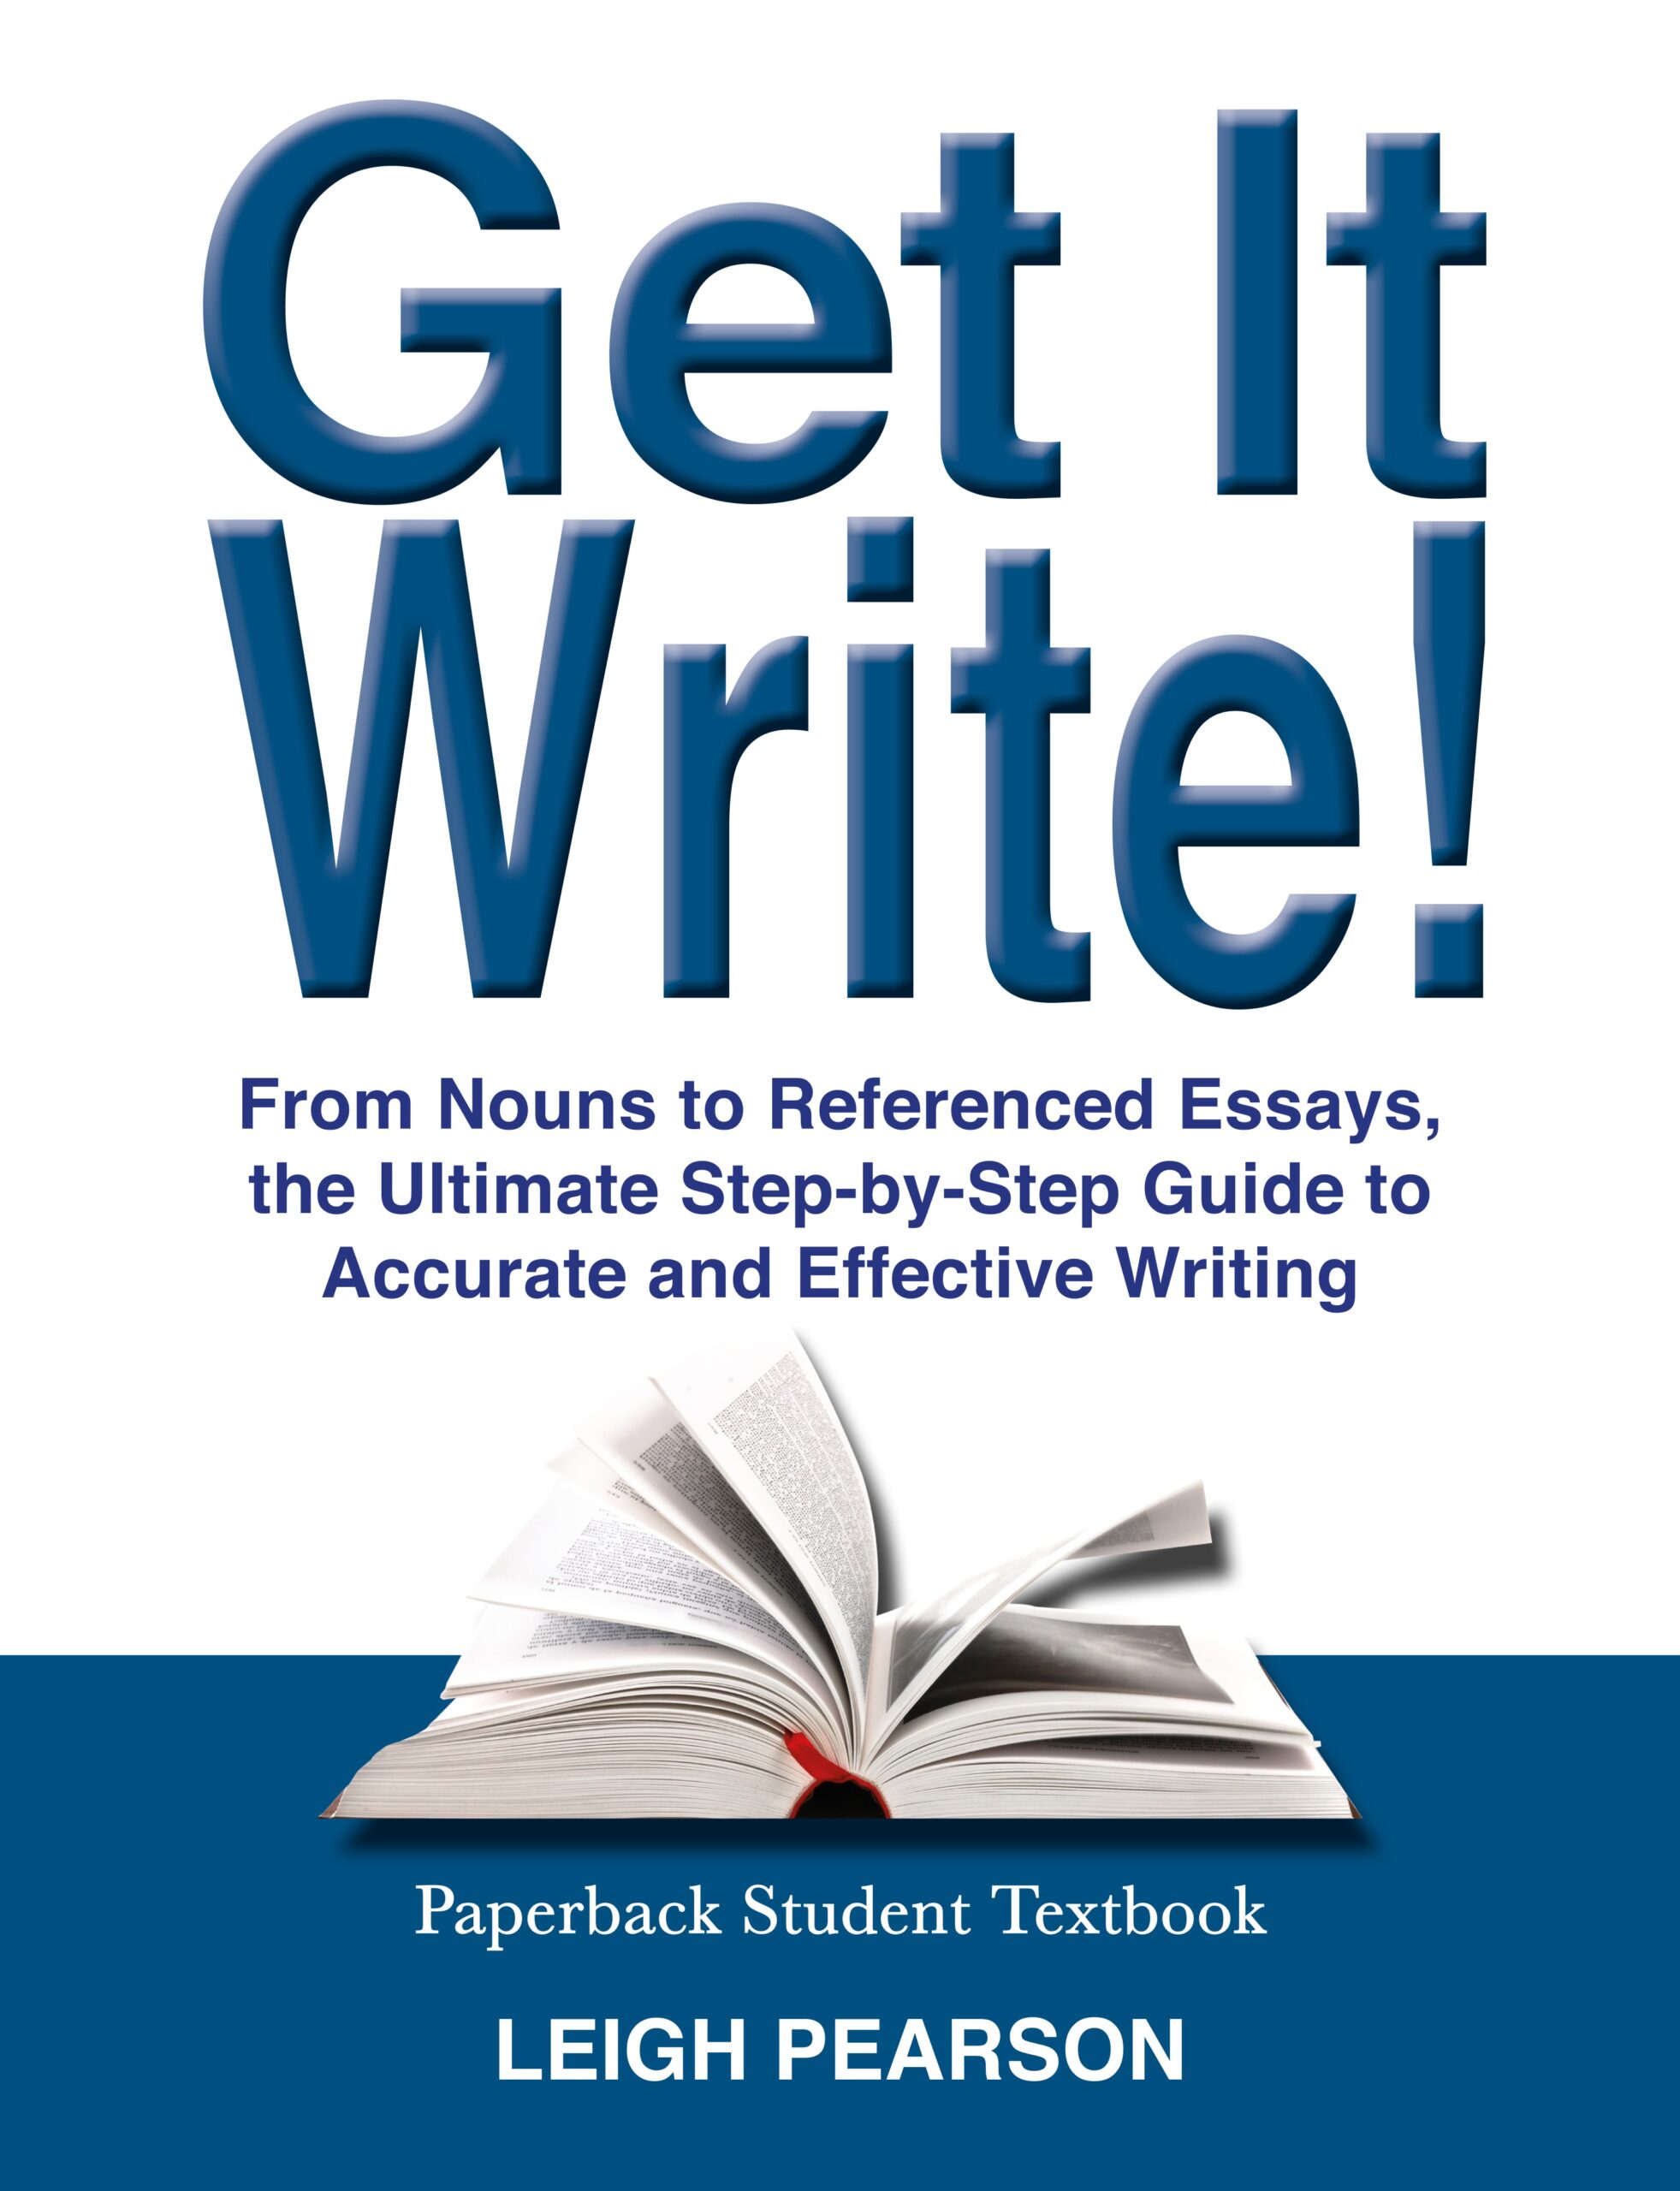 FREE: Get It Write! From Nouns to Referenced Essays, the Ultimate Step-by-Step Guide to Accurate and Effective Writing by Leigh Pearson